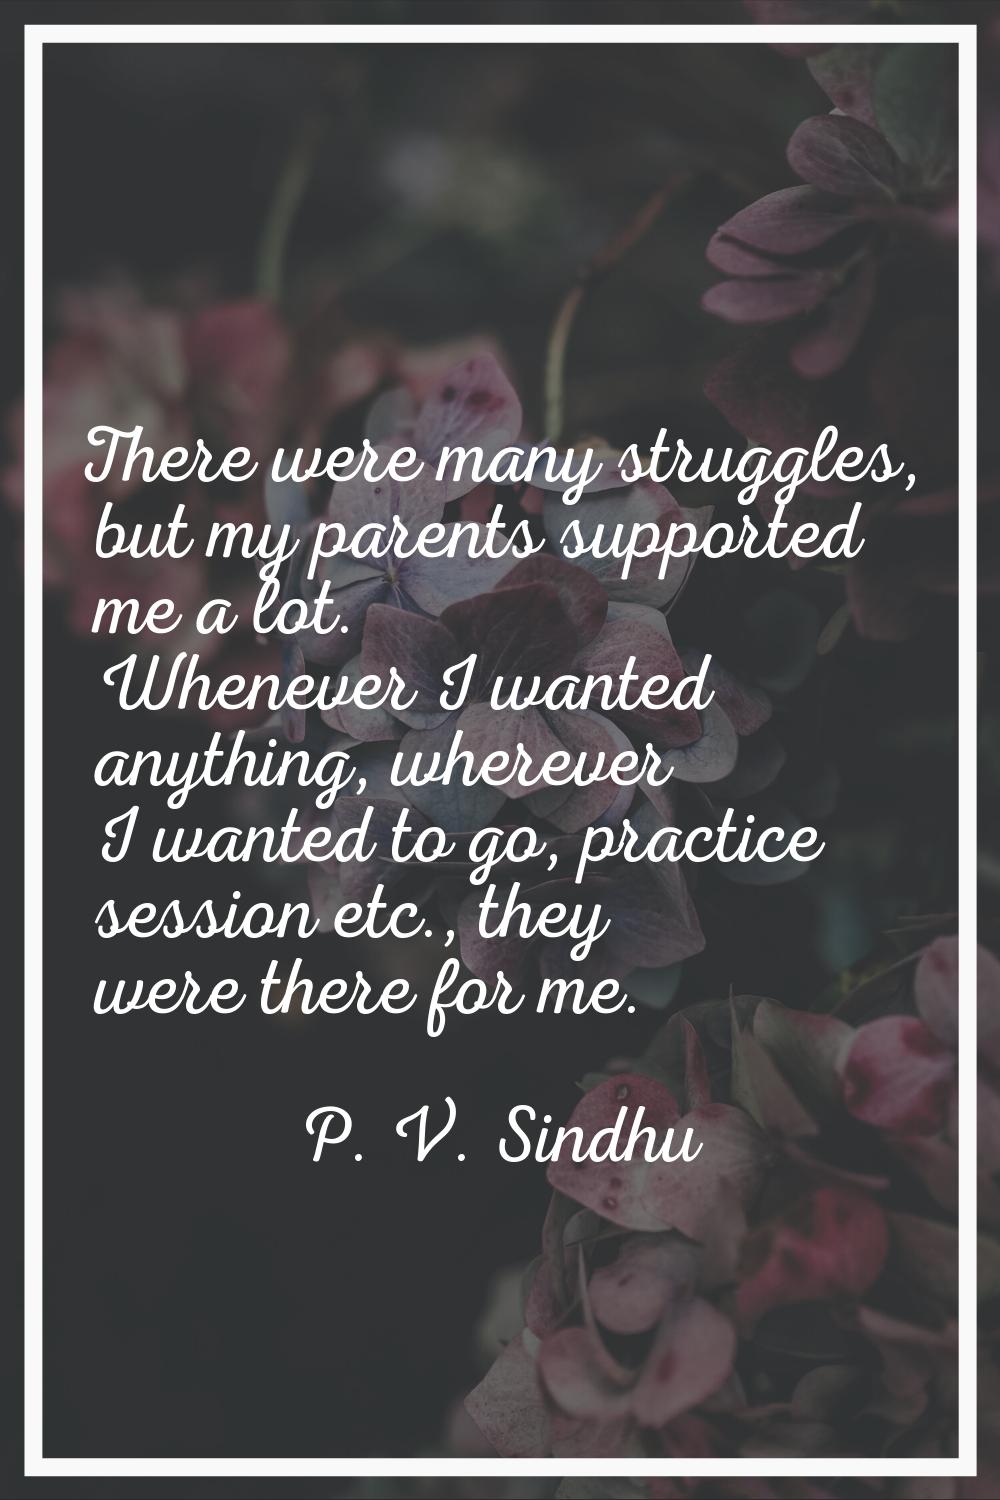 There were many struggles, but my parents supported me a lot. Whenever I wanted anything, wherever 